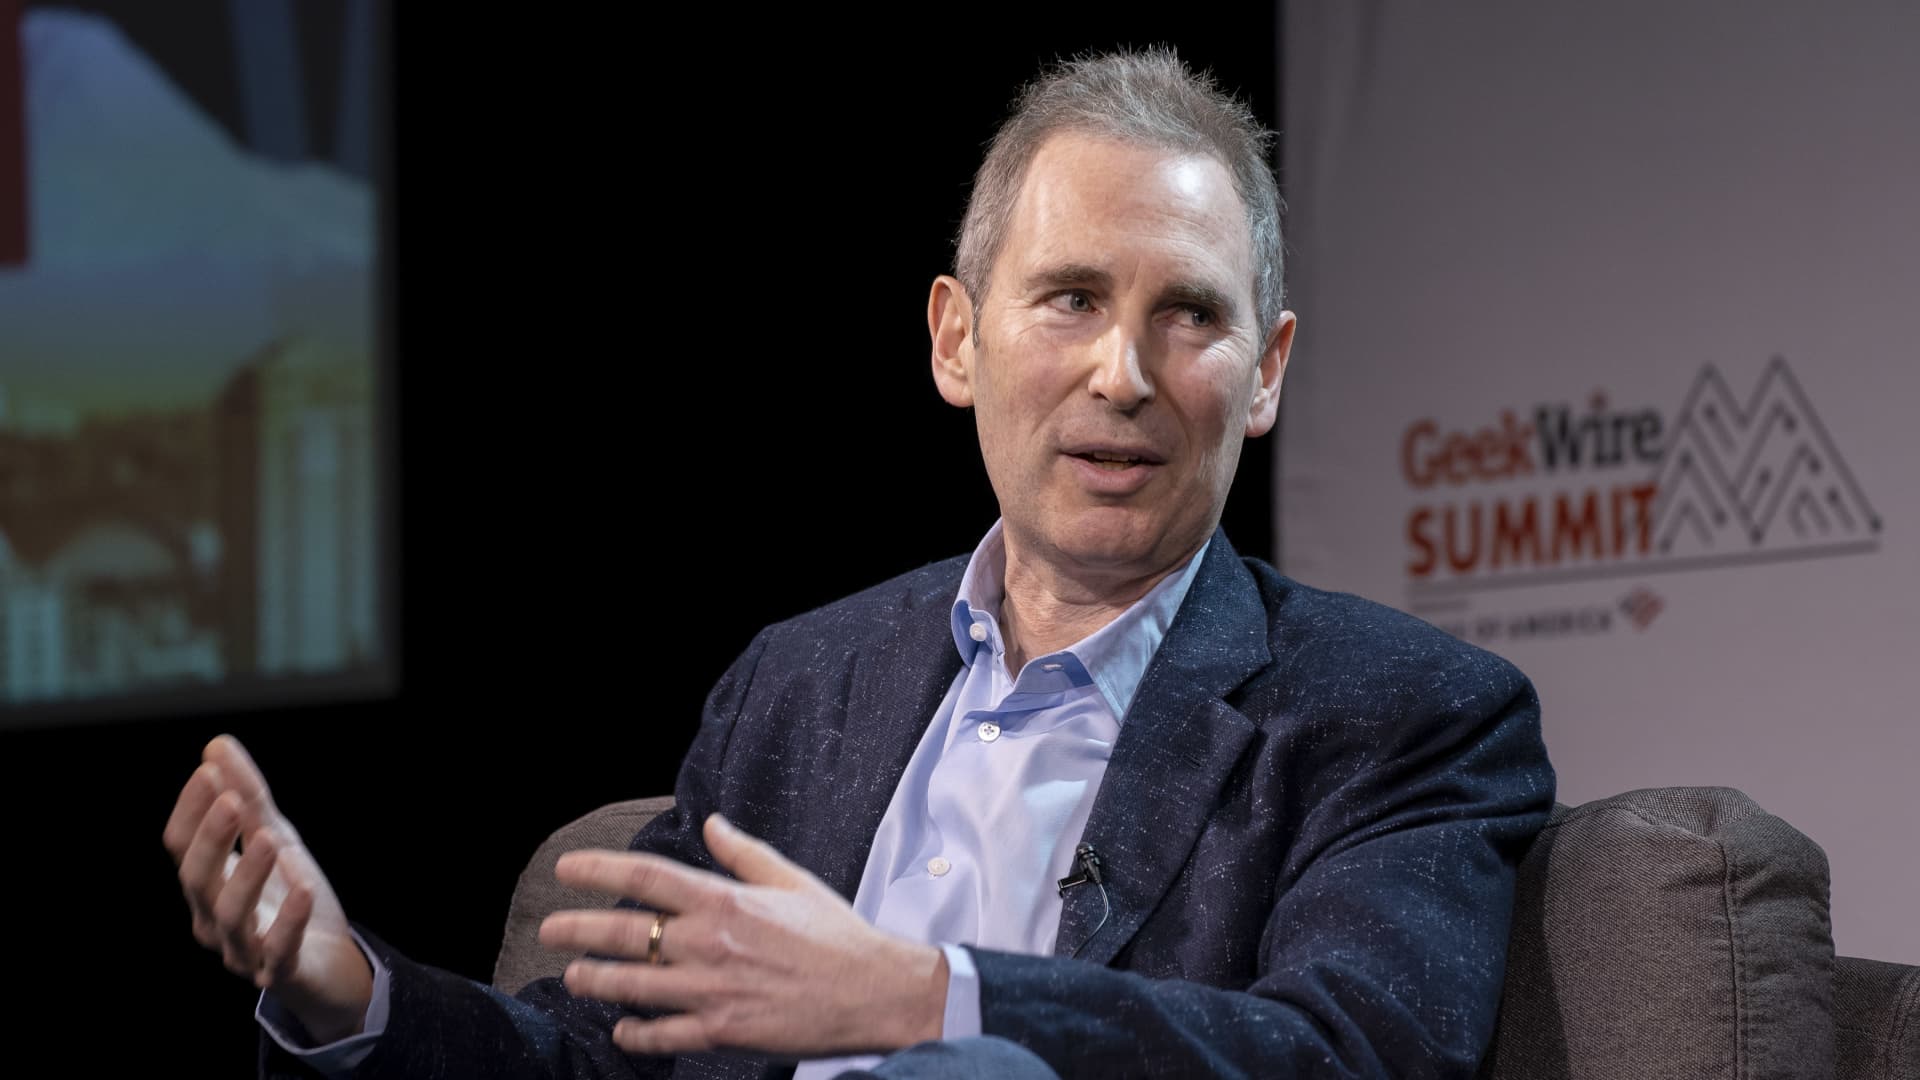 Andy Jassy, chief executive officer of Amazon.Com Inc., speaks during the GeekWire Summit in Seattle, Washington, U.S., on Tuesday, Oct. 5, 2021.